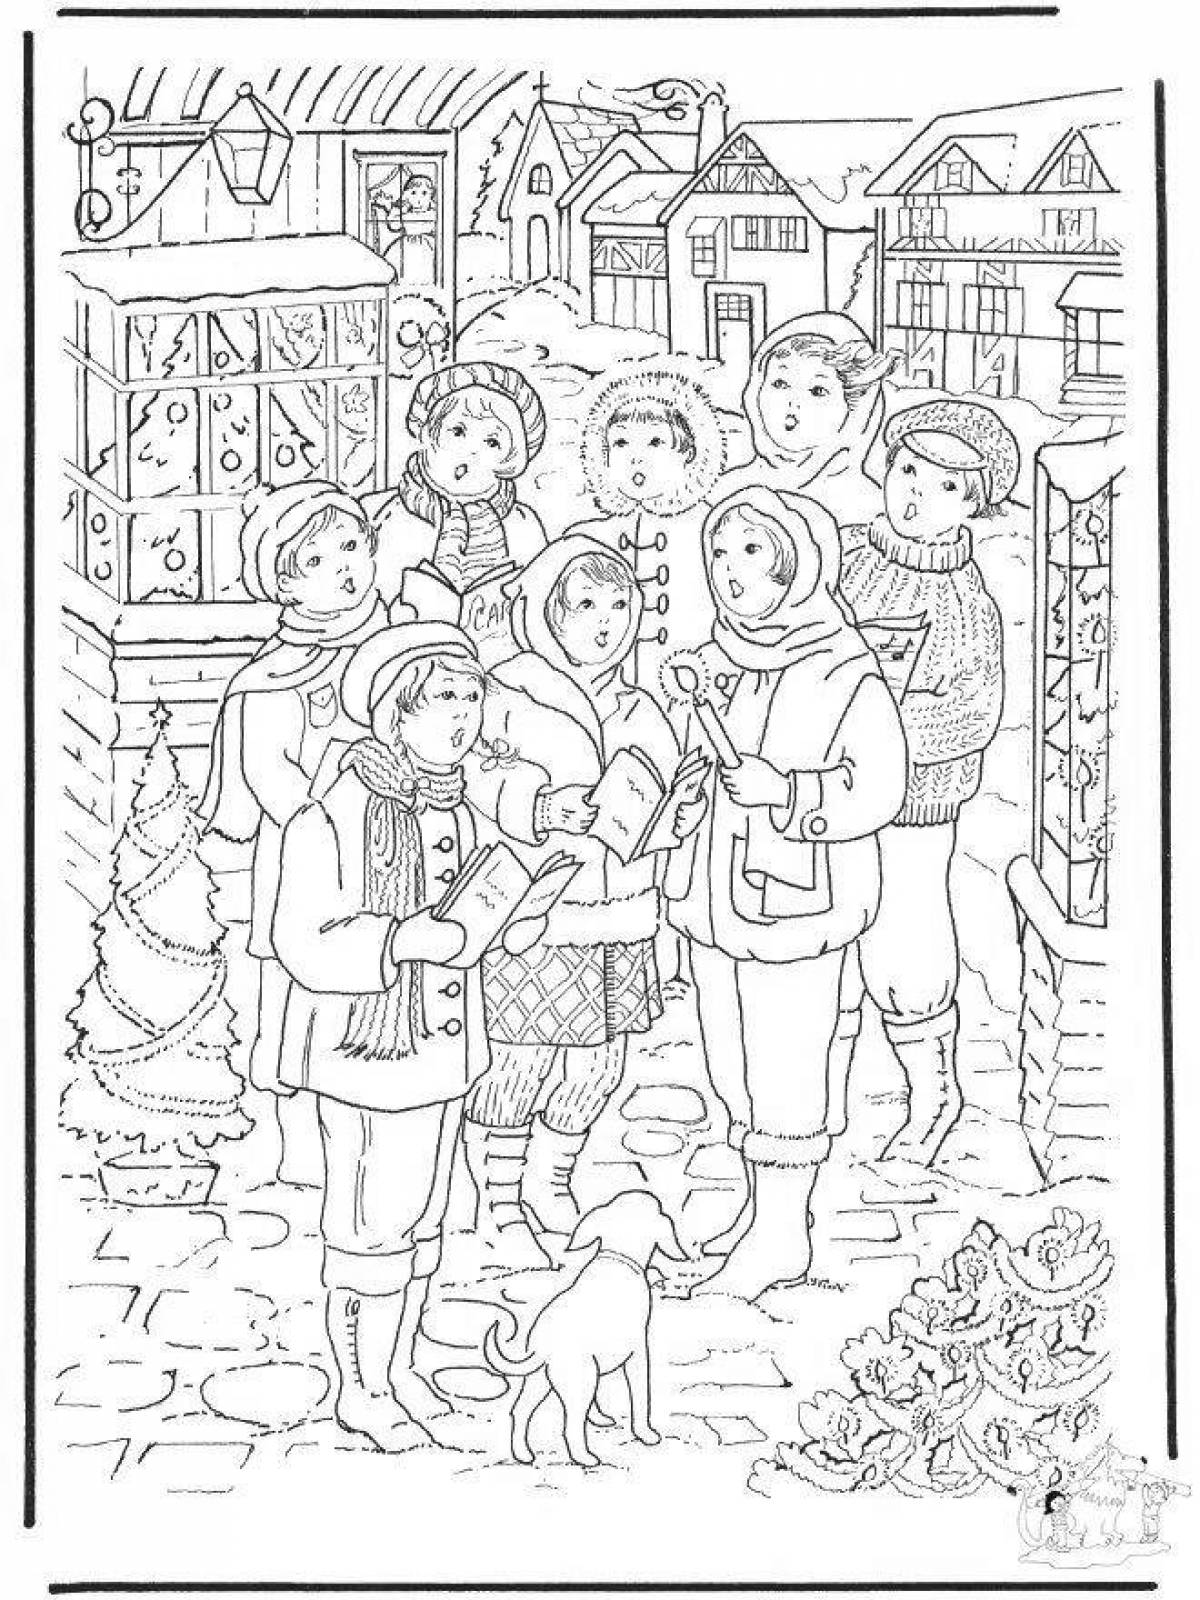 Blissful carol coloring pages for preschoolers